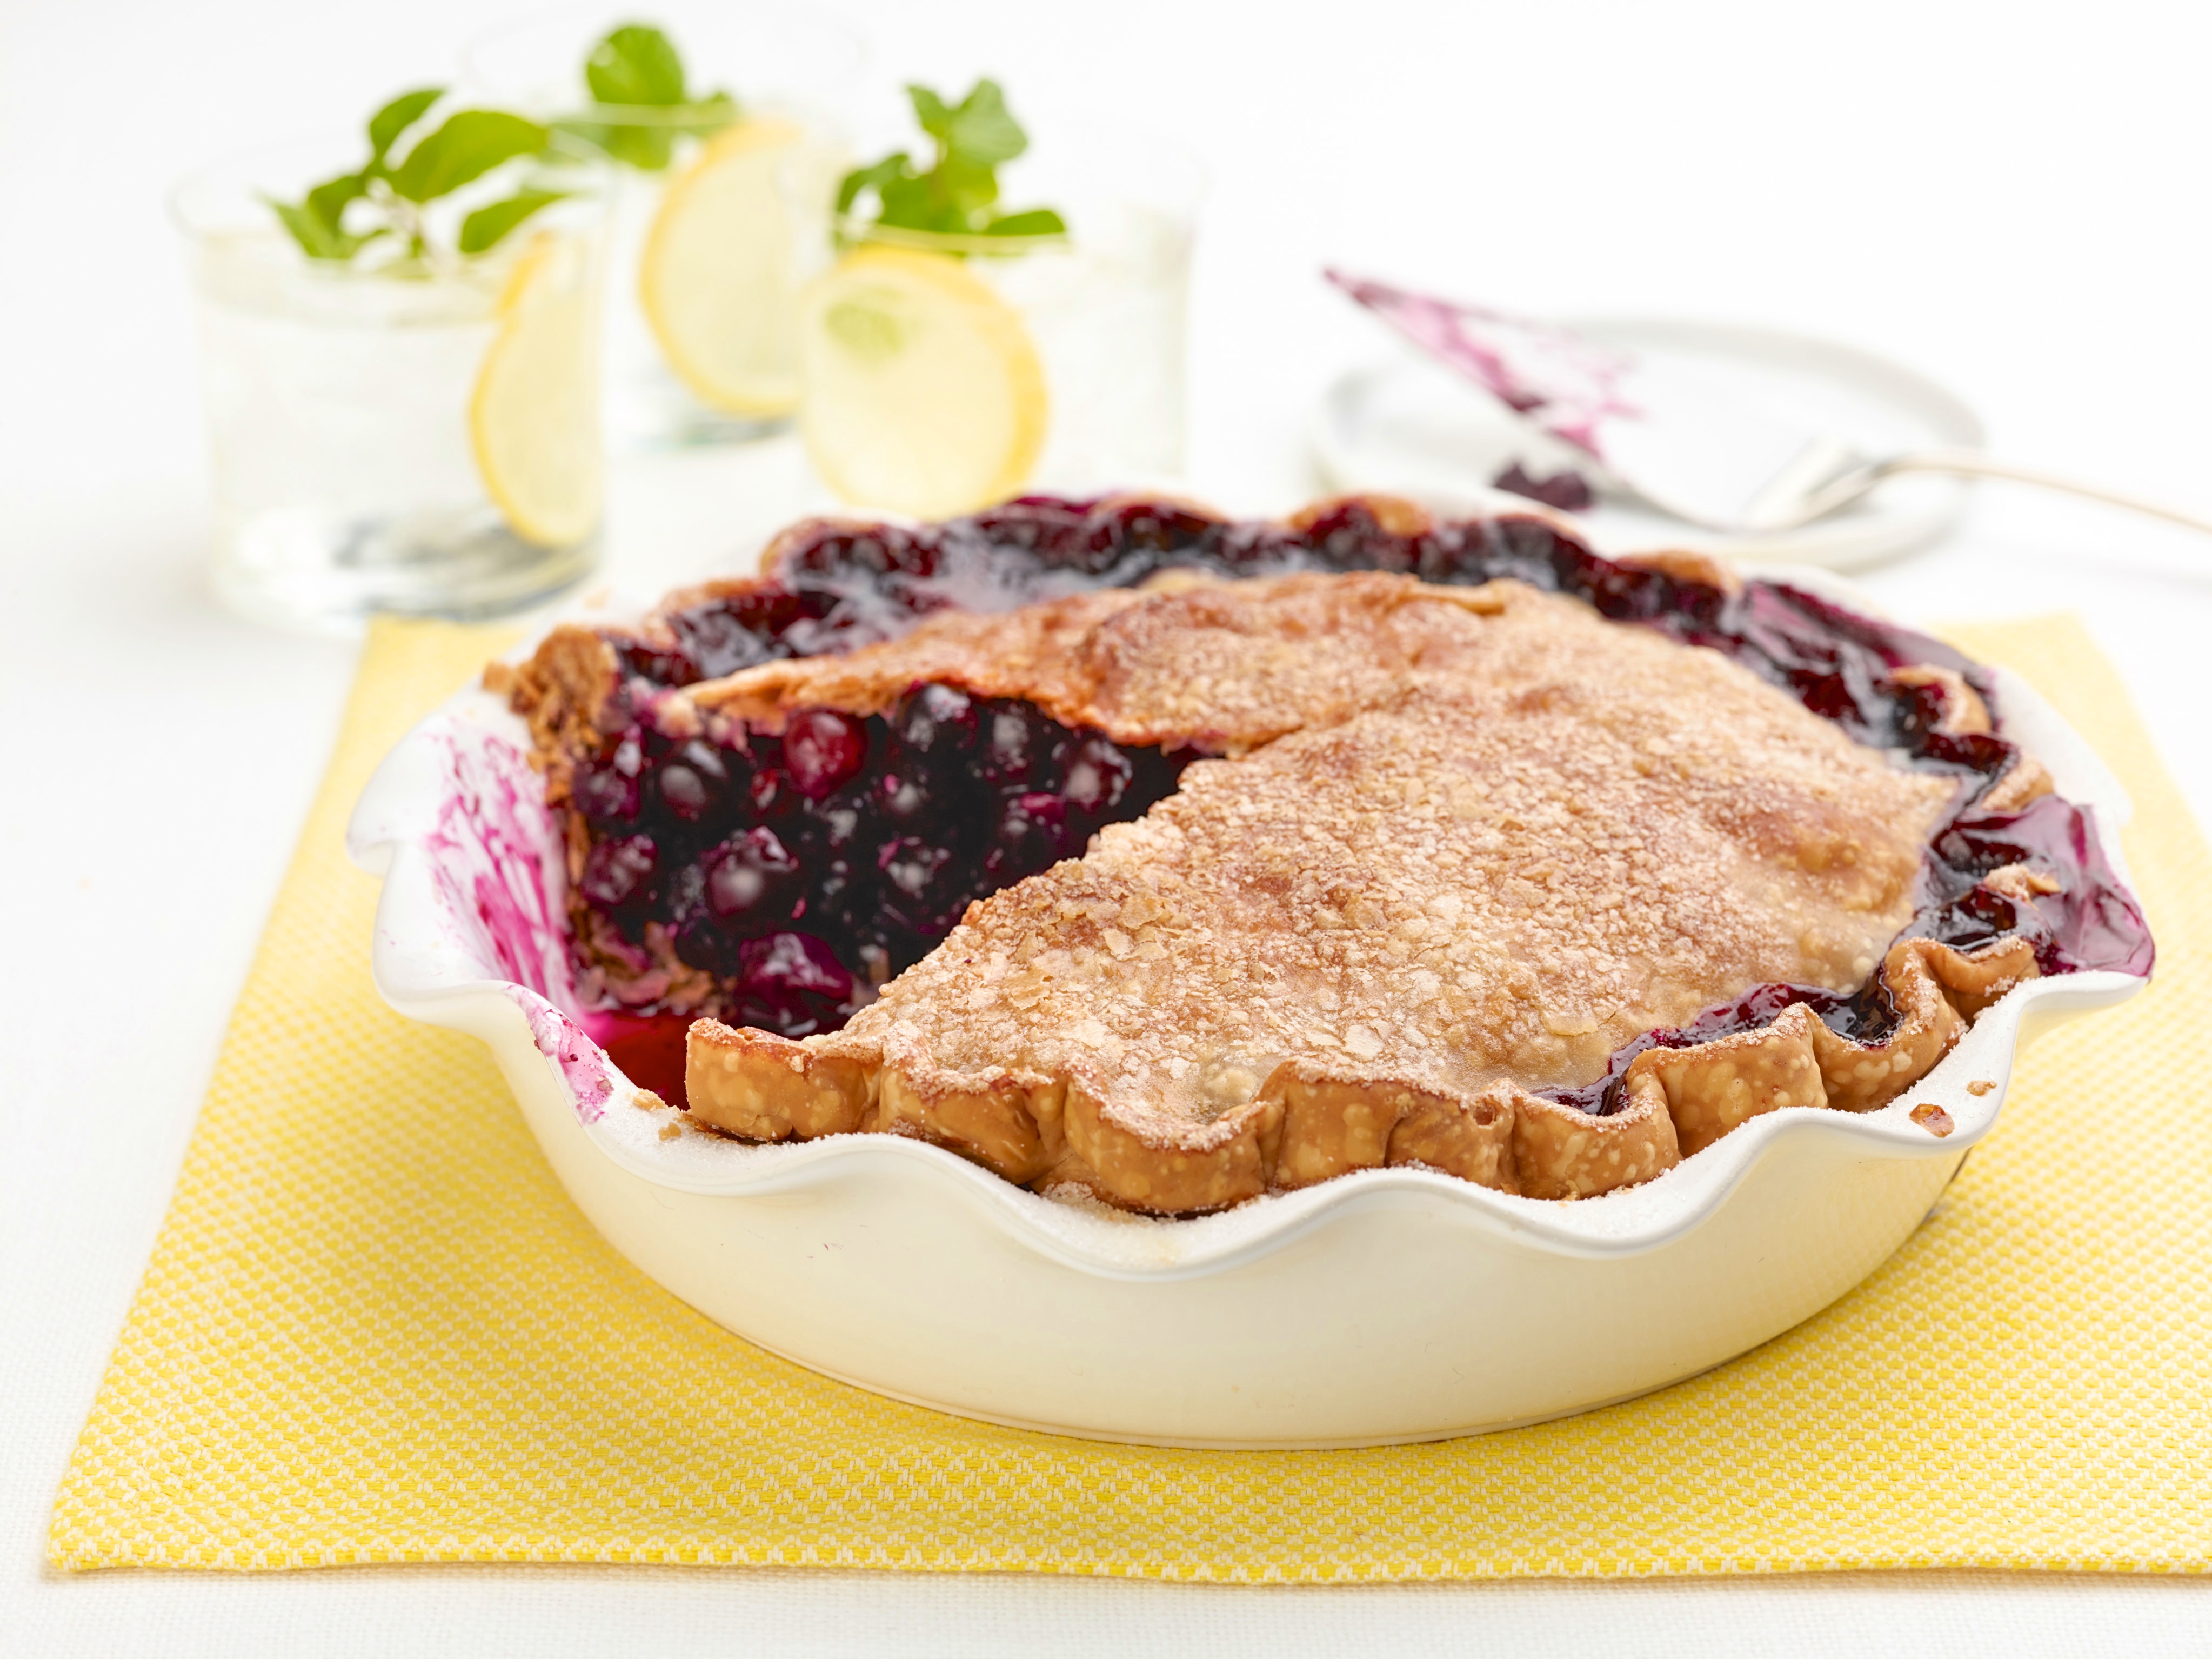 Blueberry-Lemon Pie with a Butter Crust Recipe